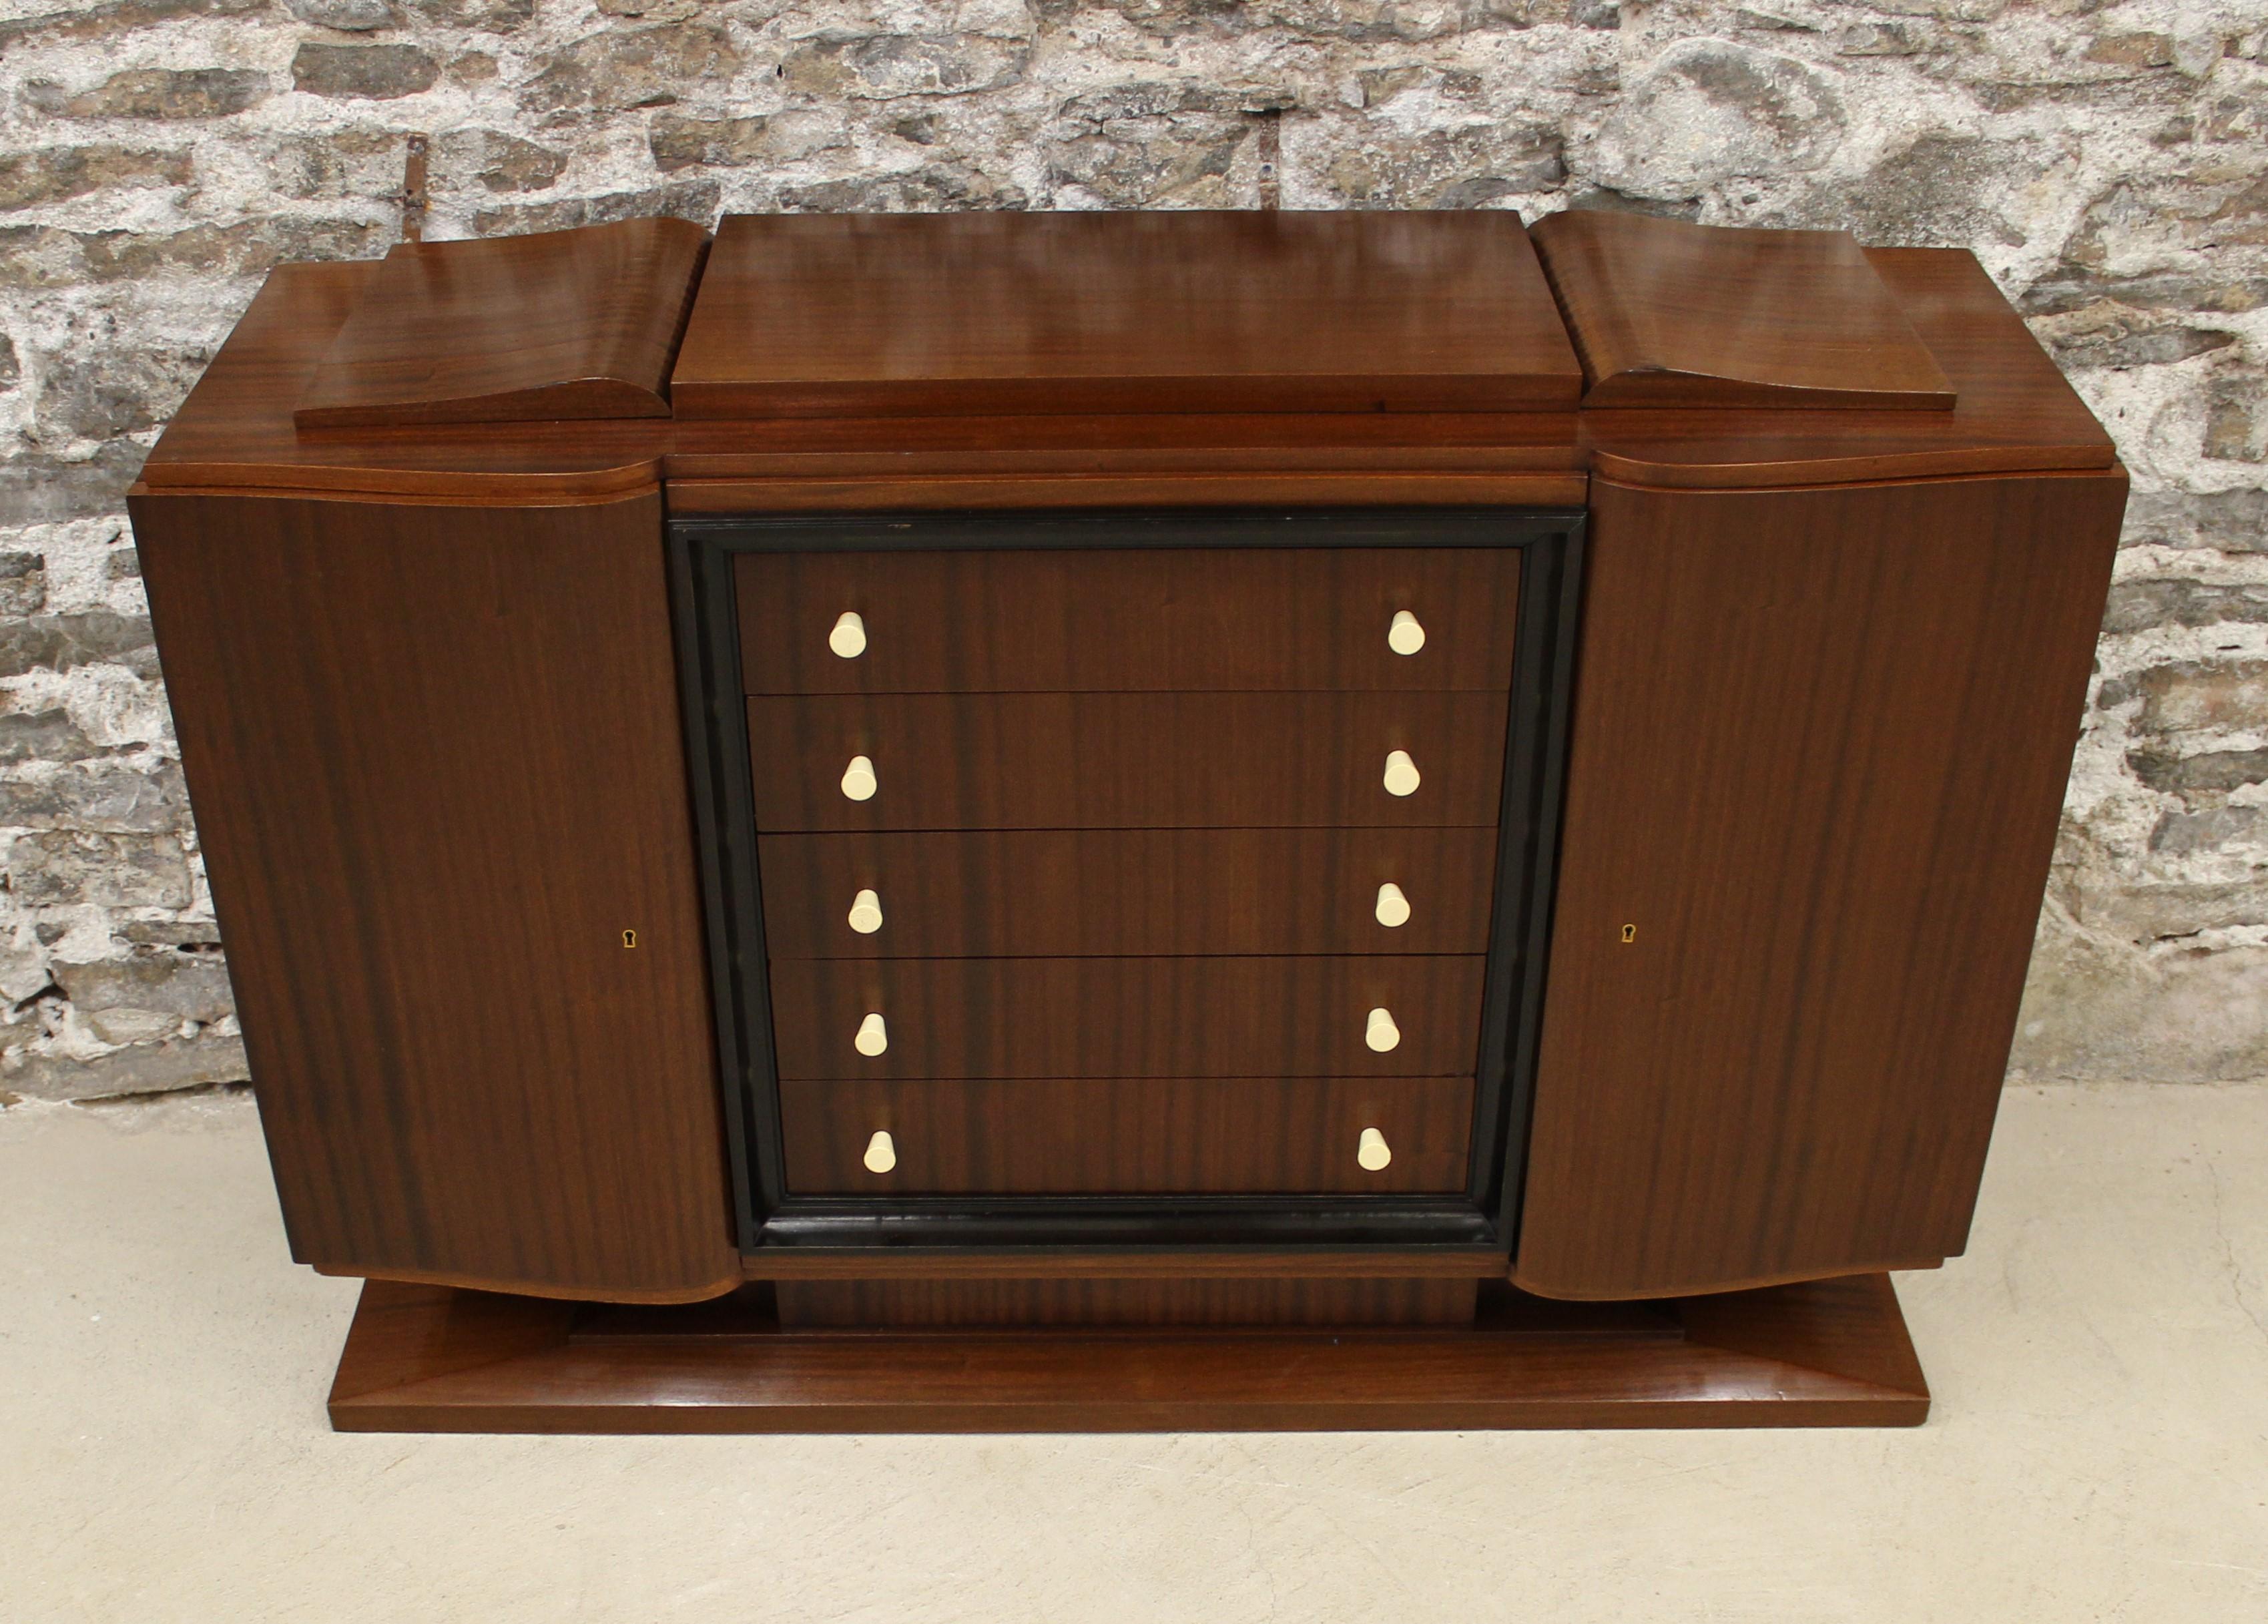 Art Deco Mahogany sideboard with double bowed doors flanking five drawers with turned natural handles surrounded by an ebonized stepped frame.

Credenza / Sideboard / Buffet / Cabinet.